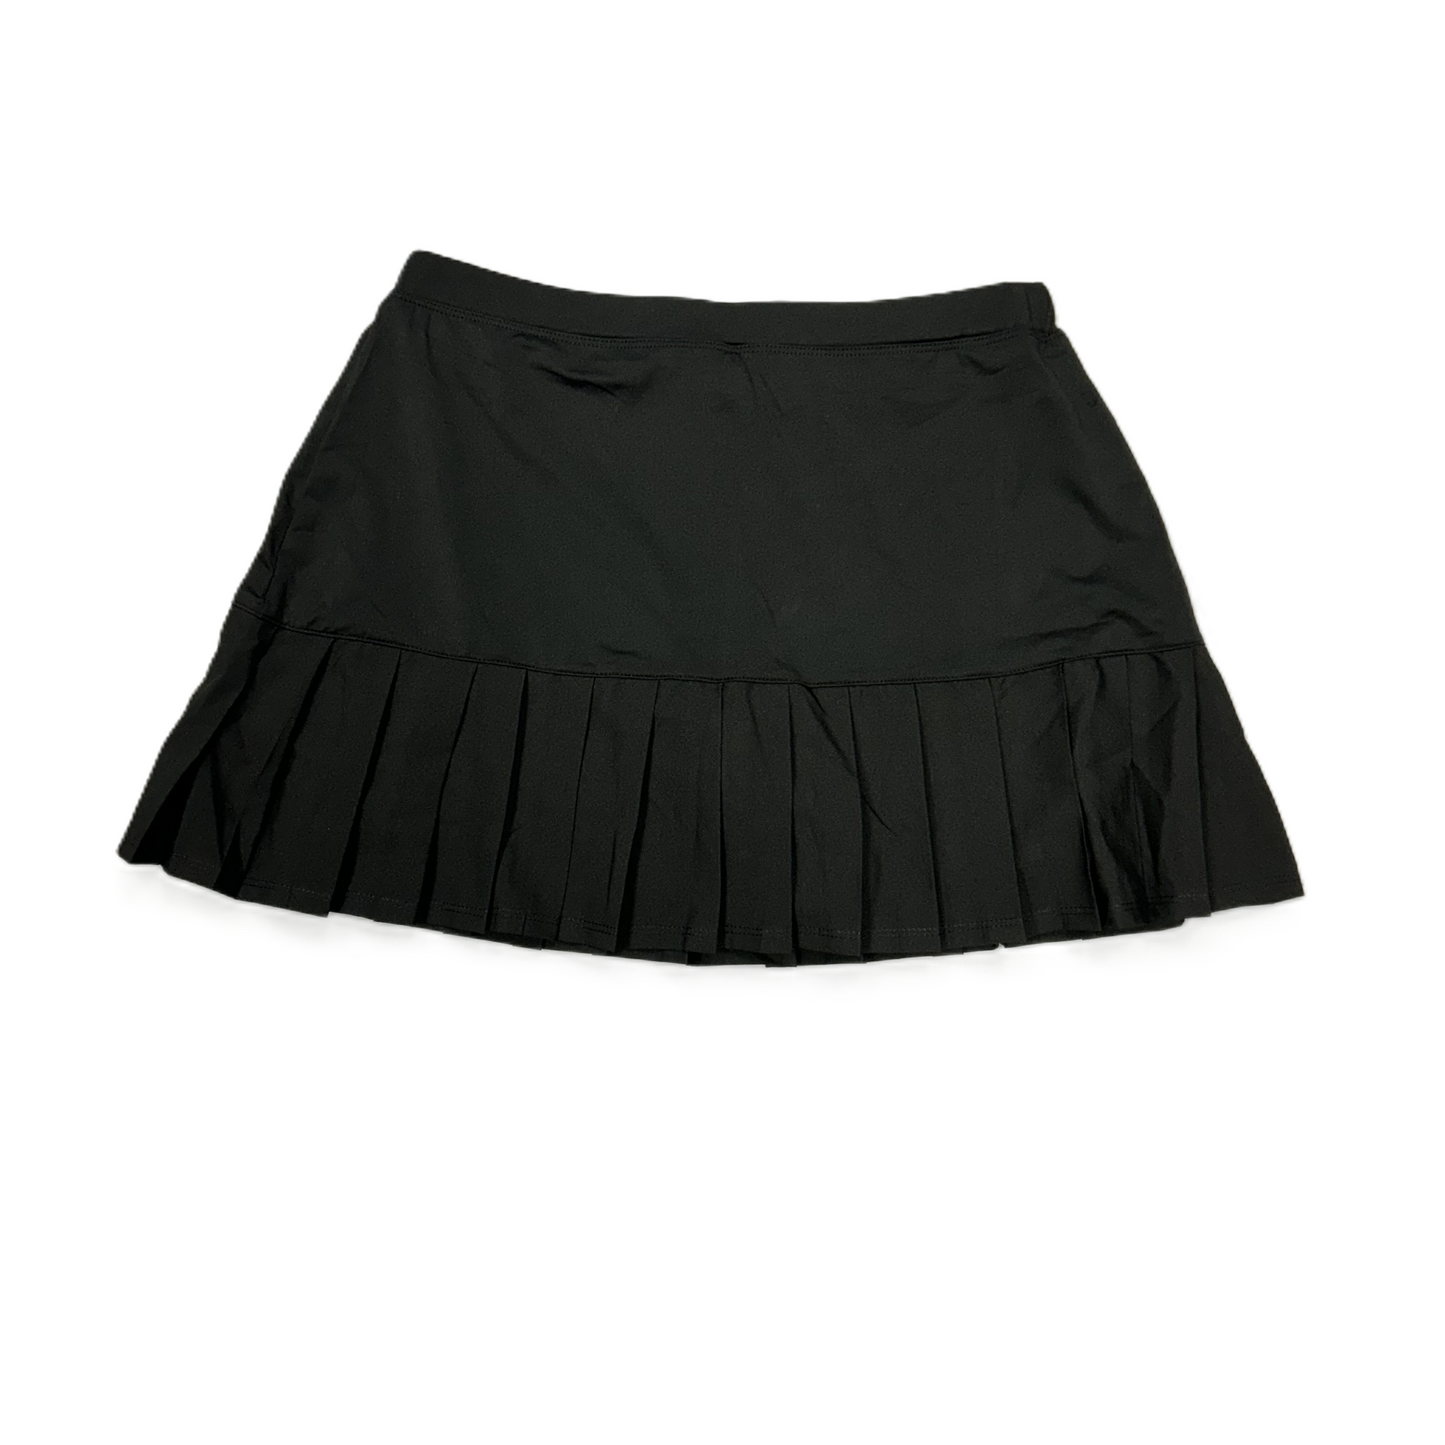 Athletic Skirt By Fila  Size: M